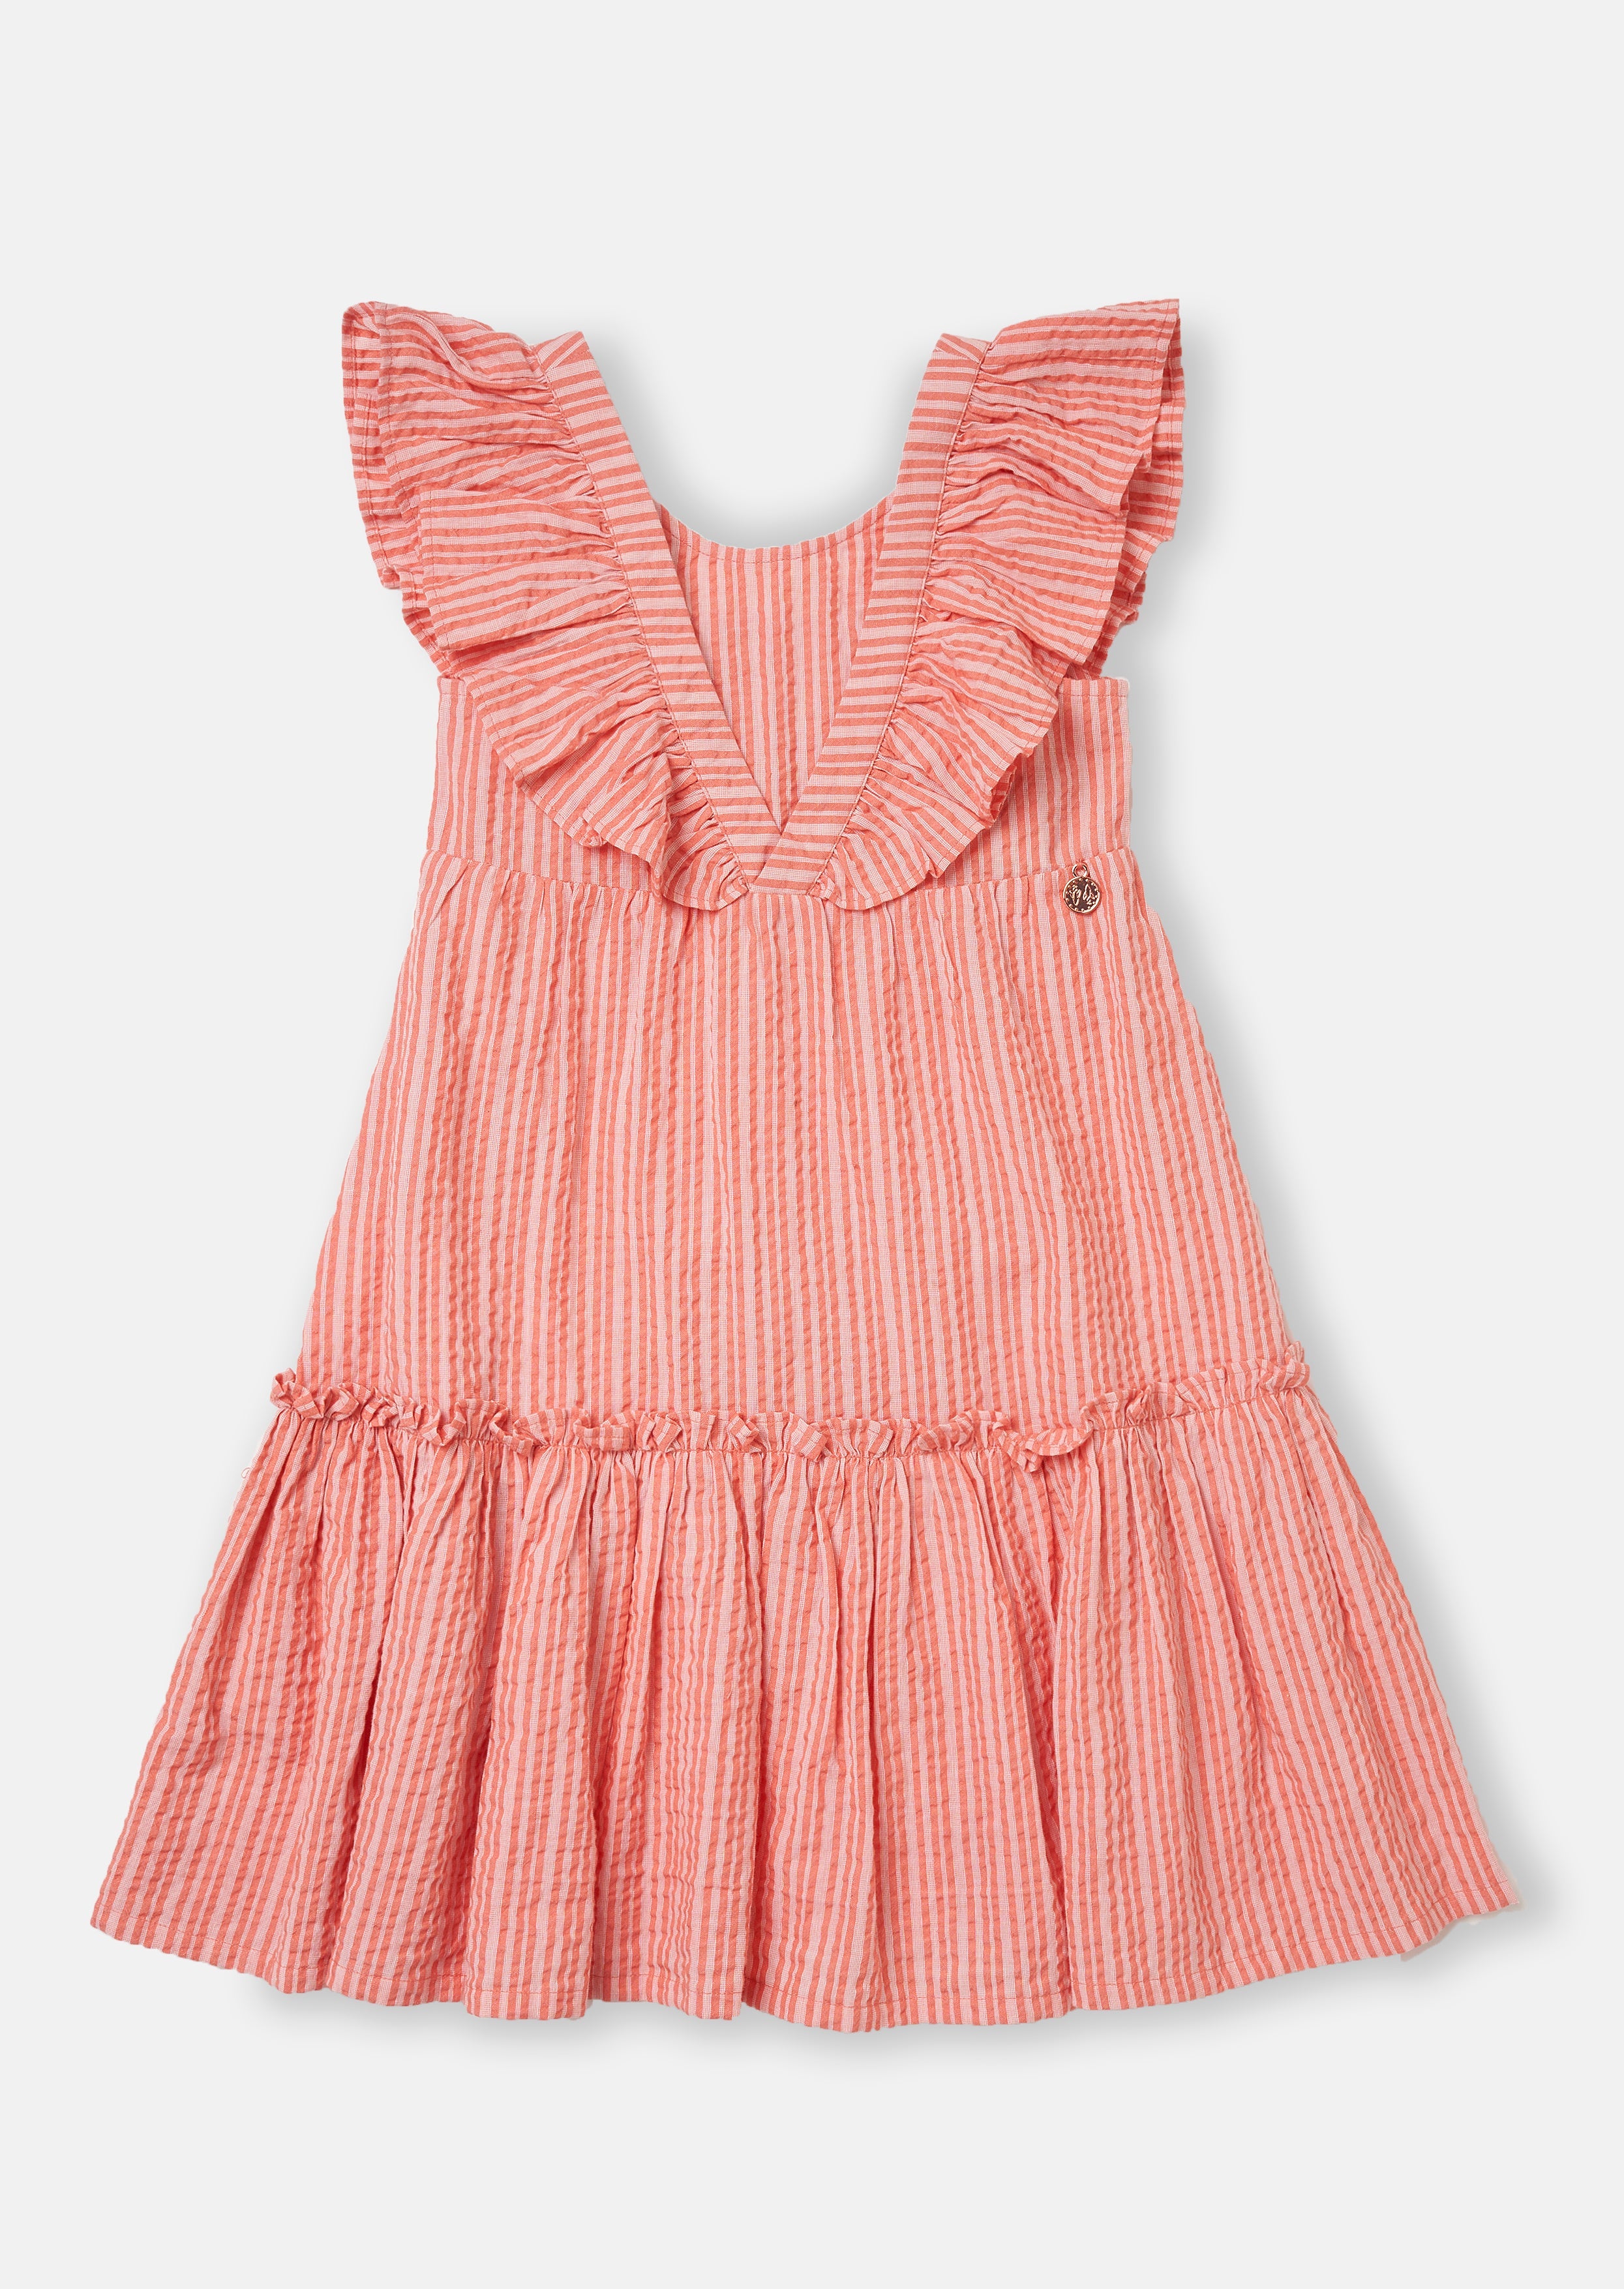 Girls Striped Cotton Coral Pink Ruffle Dresses